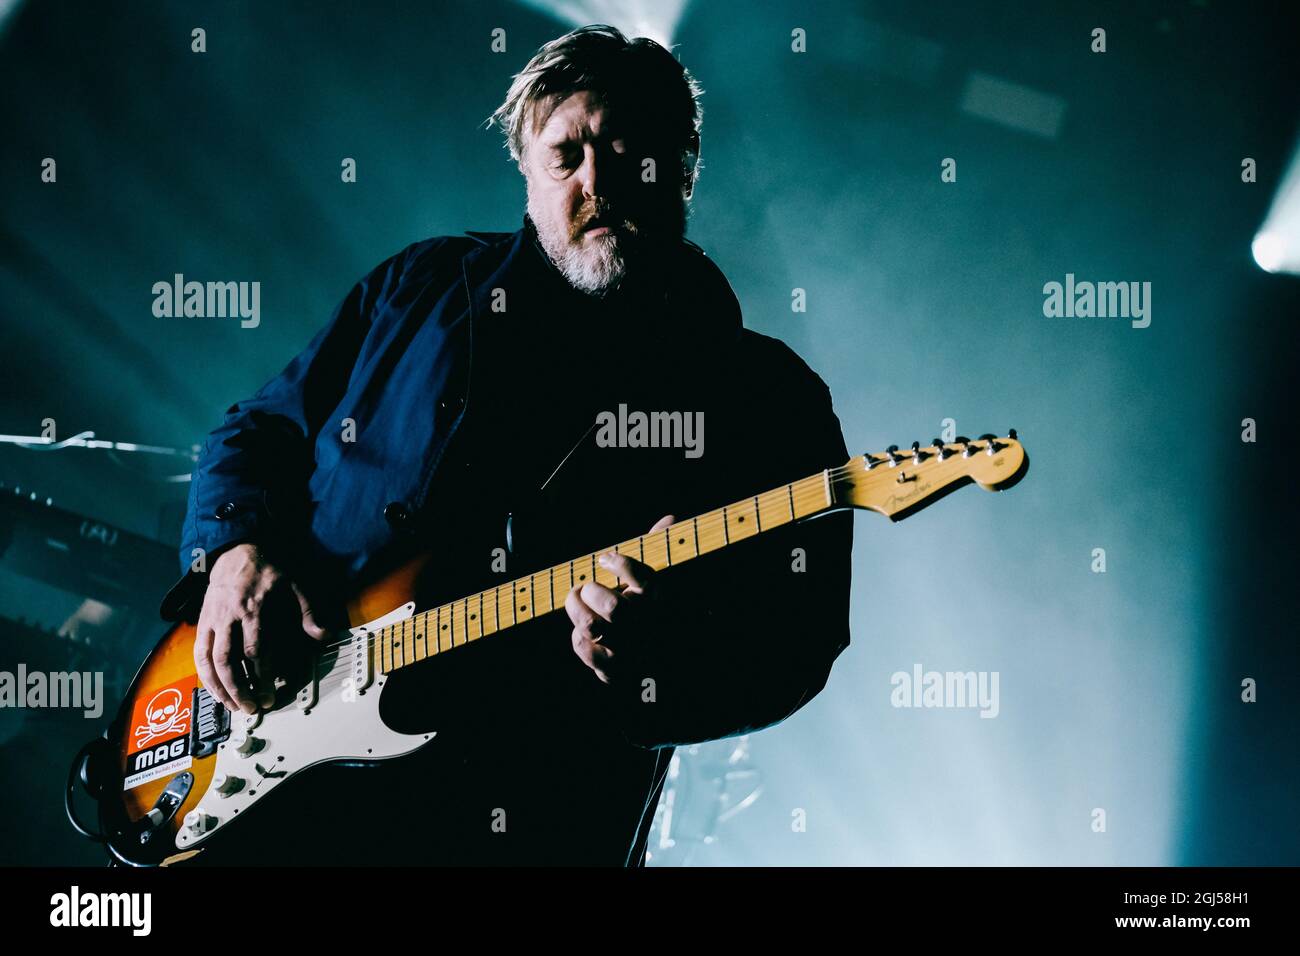 Edinburgh, UK. 8th Sep 2021. Elbow bring their Giants Of All Sizes tour to Usher Hall in Edinburgh. The tour, due to take place in late 2020, was postponed due the coronavirus pandemic. Credit: Thomas Jackson for SO.CO / Alamy Live News Stock Photo